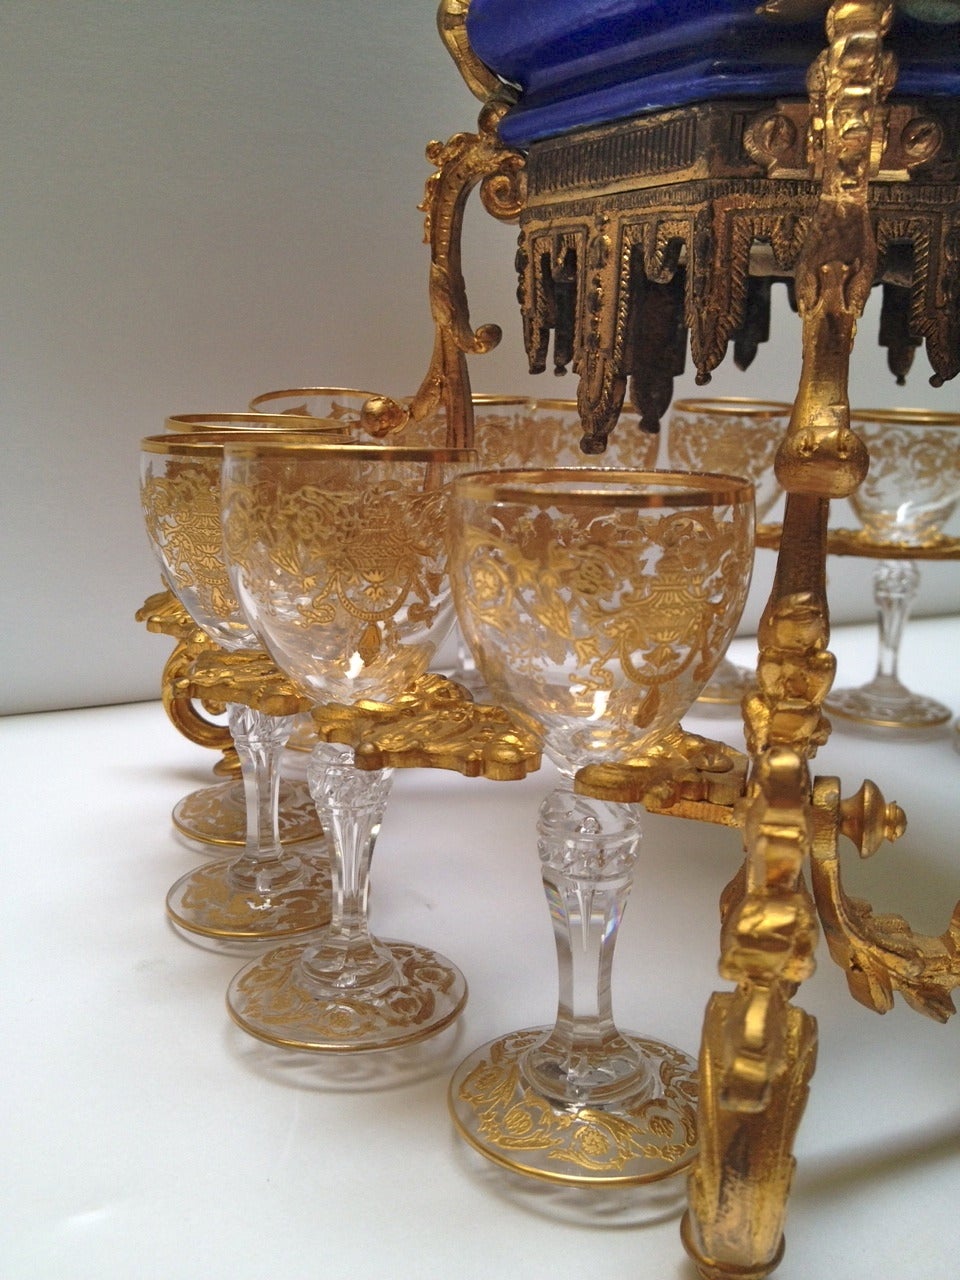 French Extremely Rare Paris Porcelain and Gilt Bronze Tantalus, 19th Century